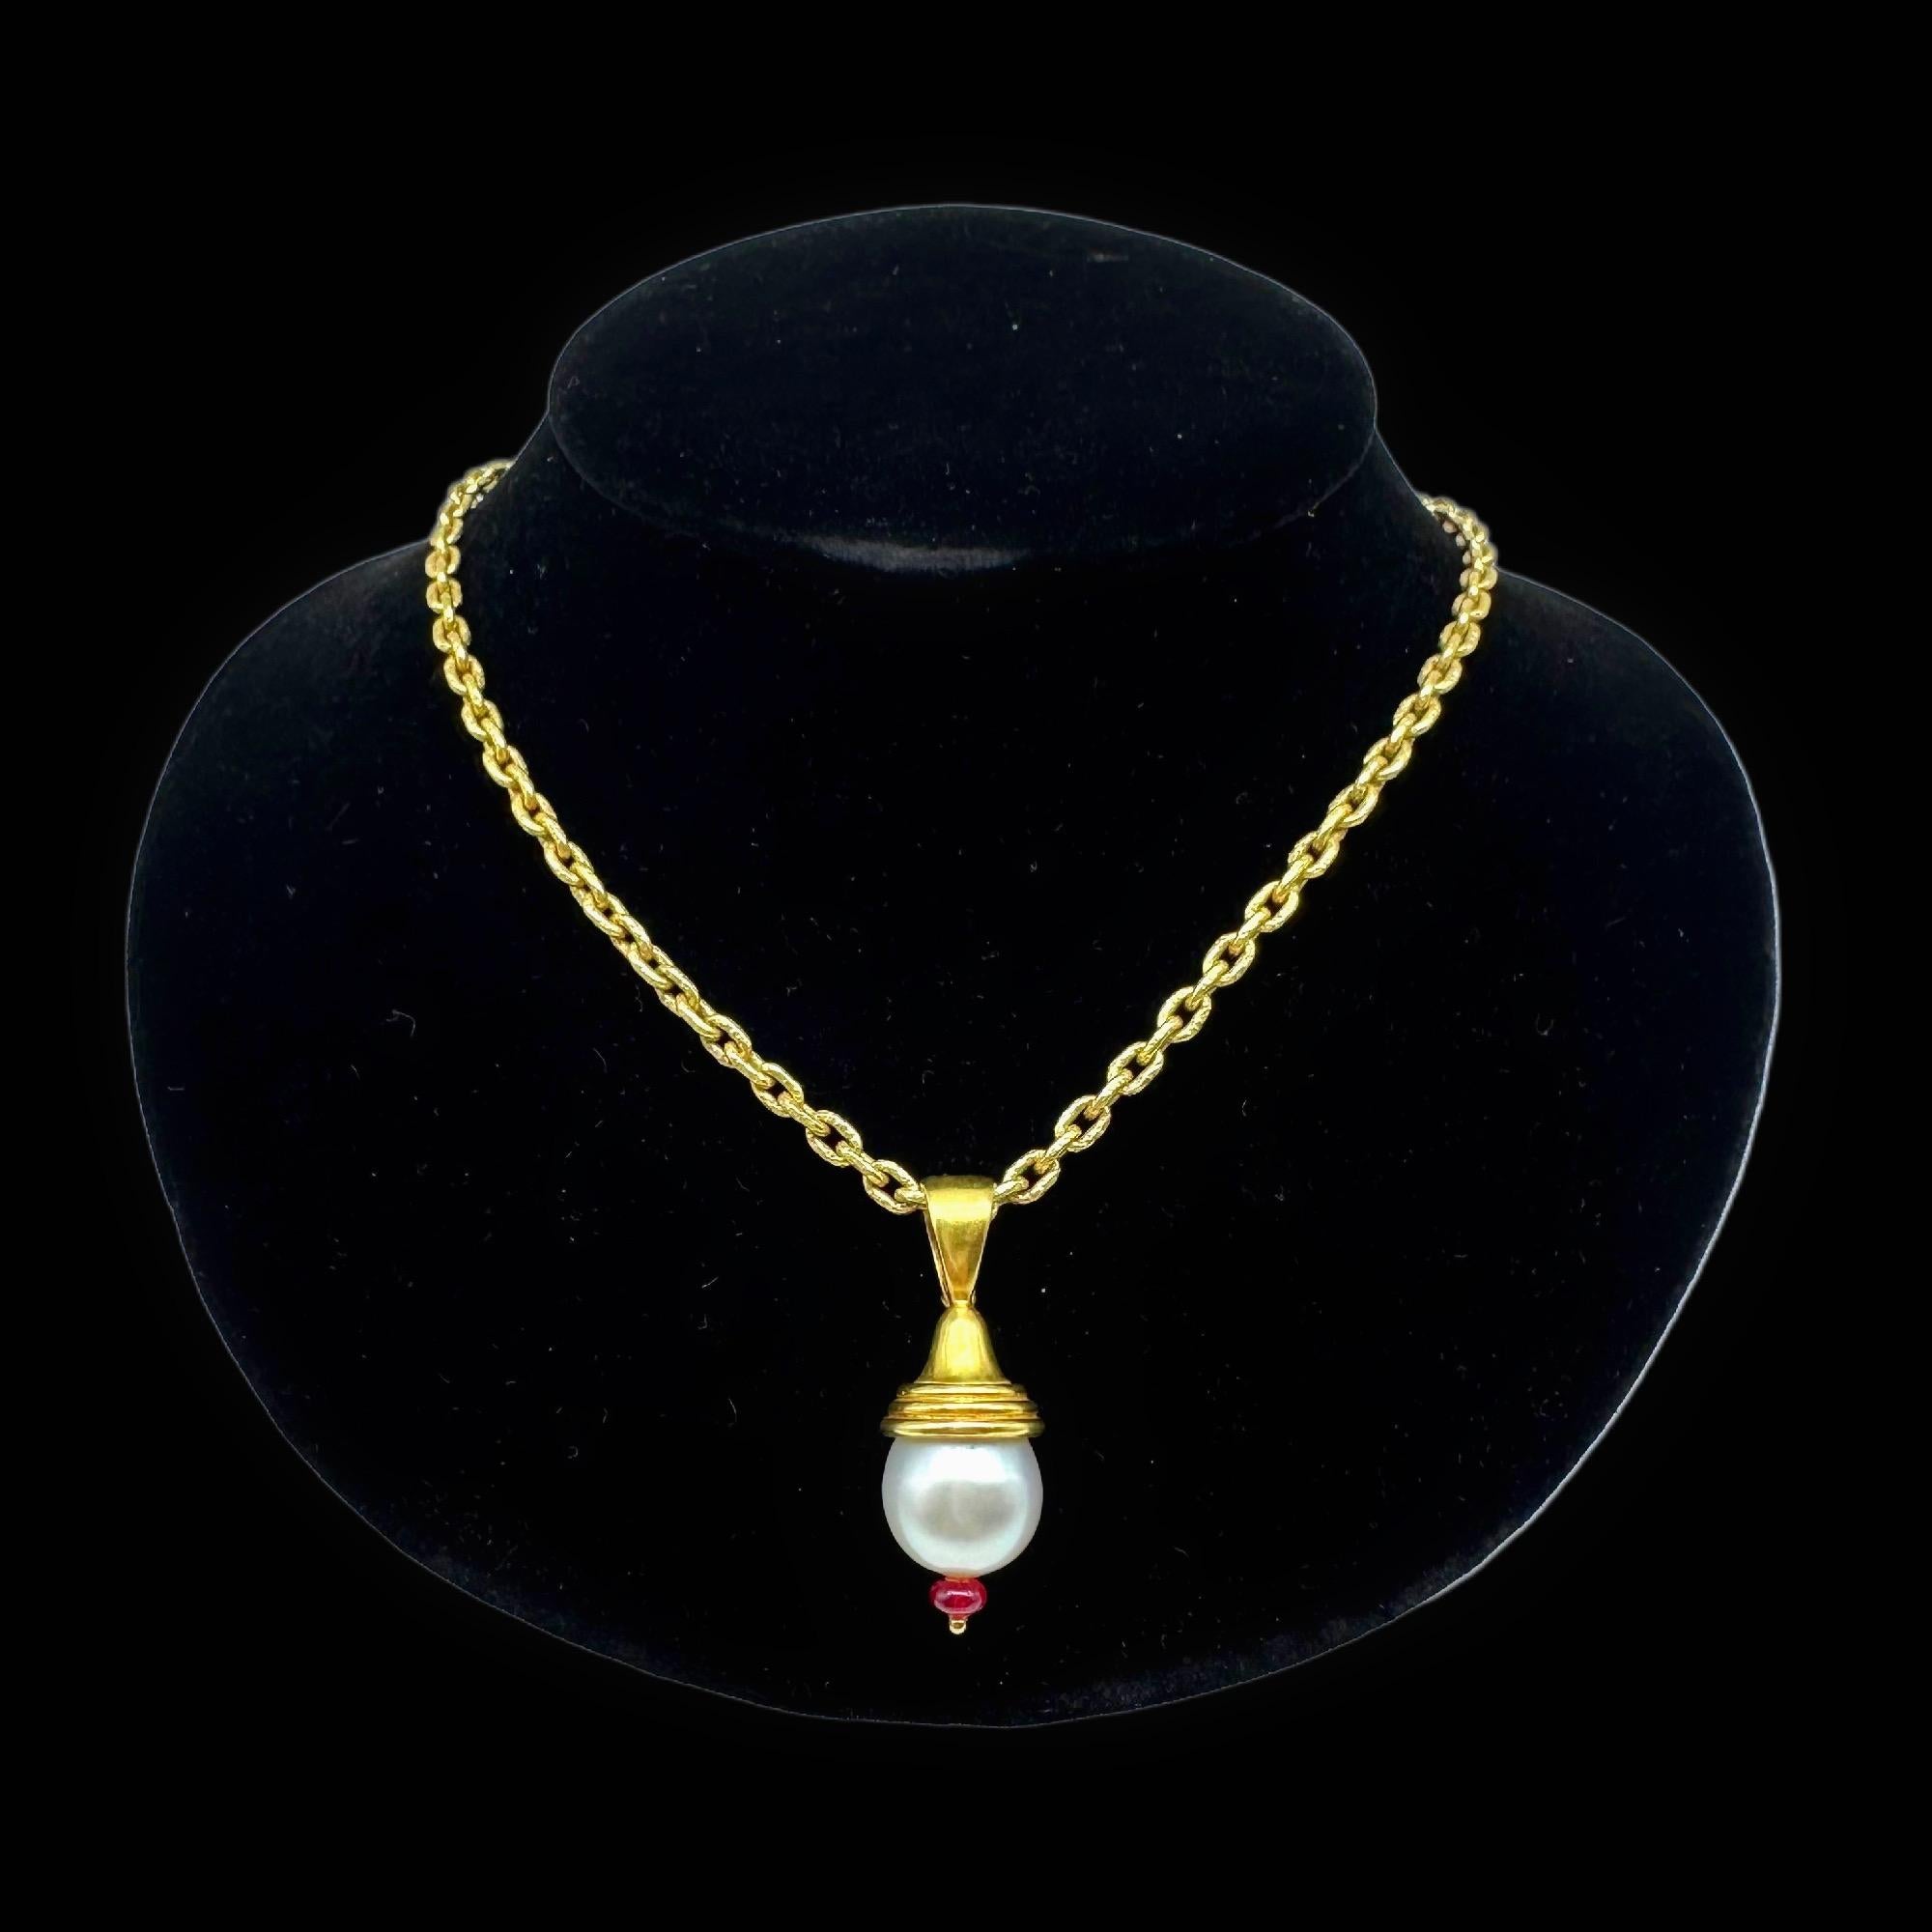 Elizabeth Locke South Sea Pearl & Venetian Glass Pendant
Style:  Pendant
Metal:   19K Hammered Yellow Gold
Size:  15 MM Pearl
Measurements:  1.5' Inches X 1/2' Inch Wide 
Hallmark:  EL 19K
Includes:  Elegant Pendant Box
Retail:  $4,950

THIS IS FOR